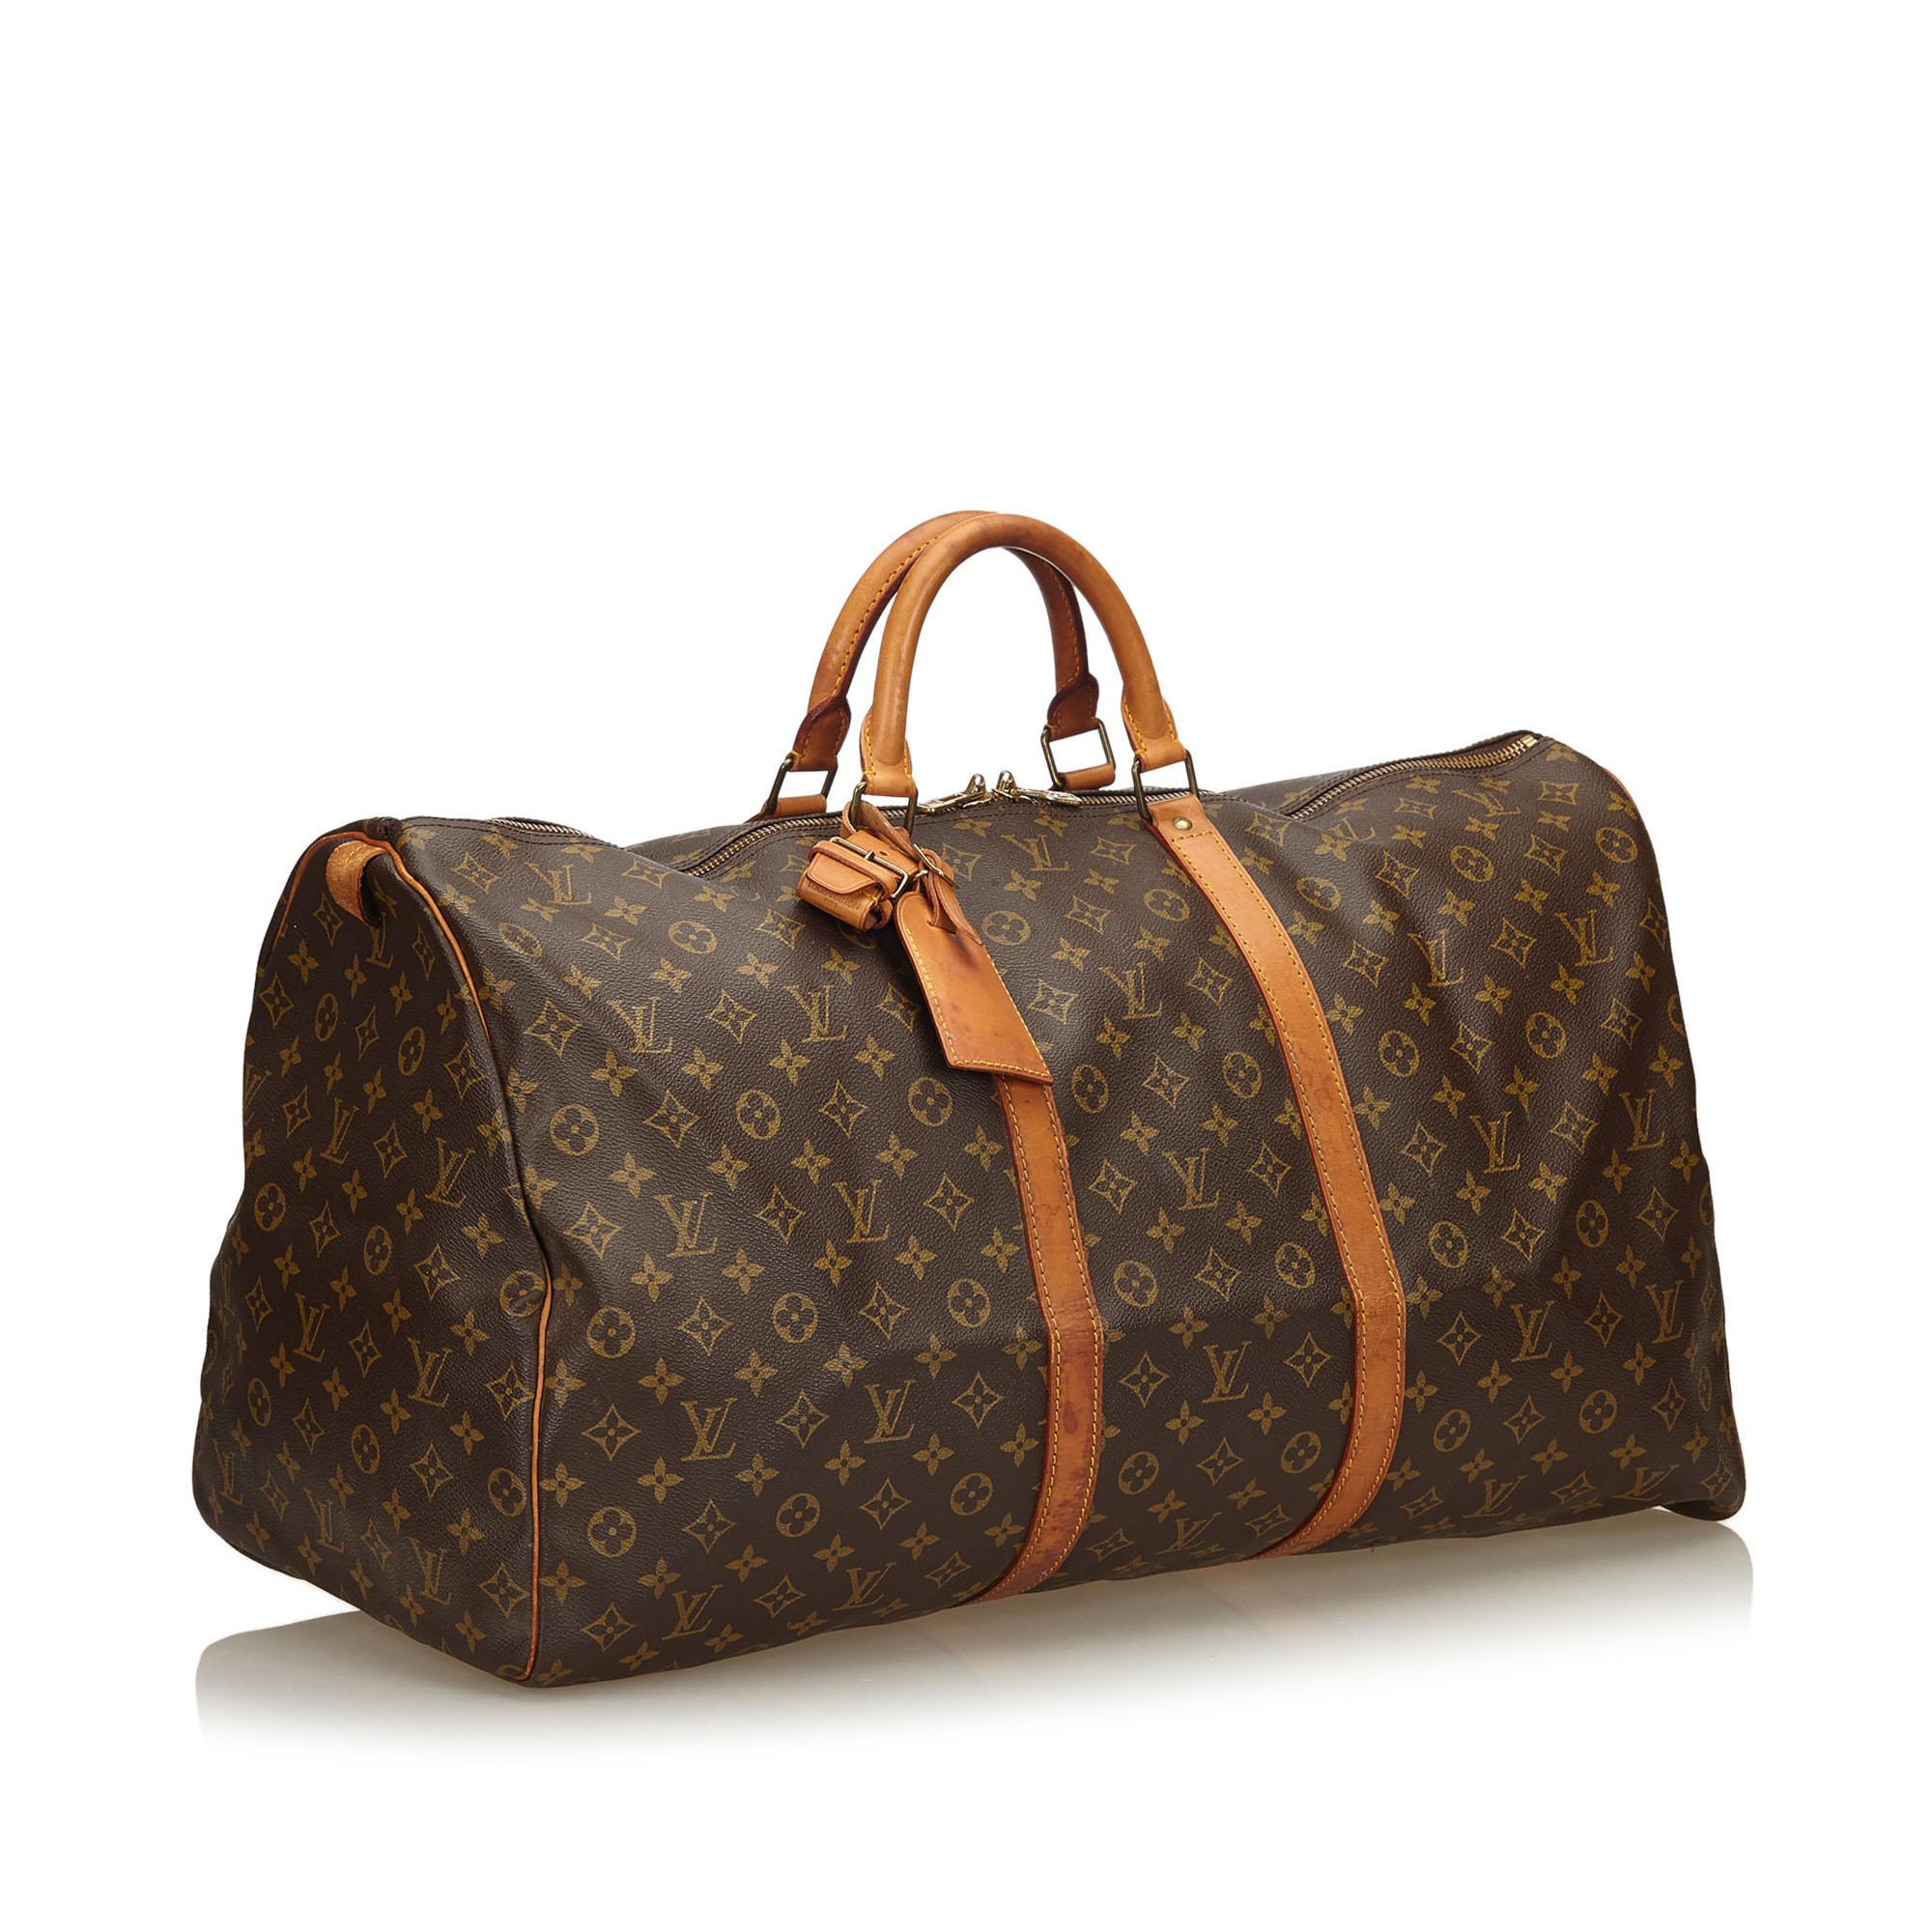 The Keepall 60 features the Monogram canvas body, rolled vachetta handles, vachetta trim, and a two-way top zip closure. It carries as B condition rating.

Inclusions: 
This item does not come with inclusions.


Louis Vuitton pieces do not come with